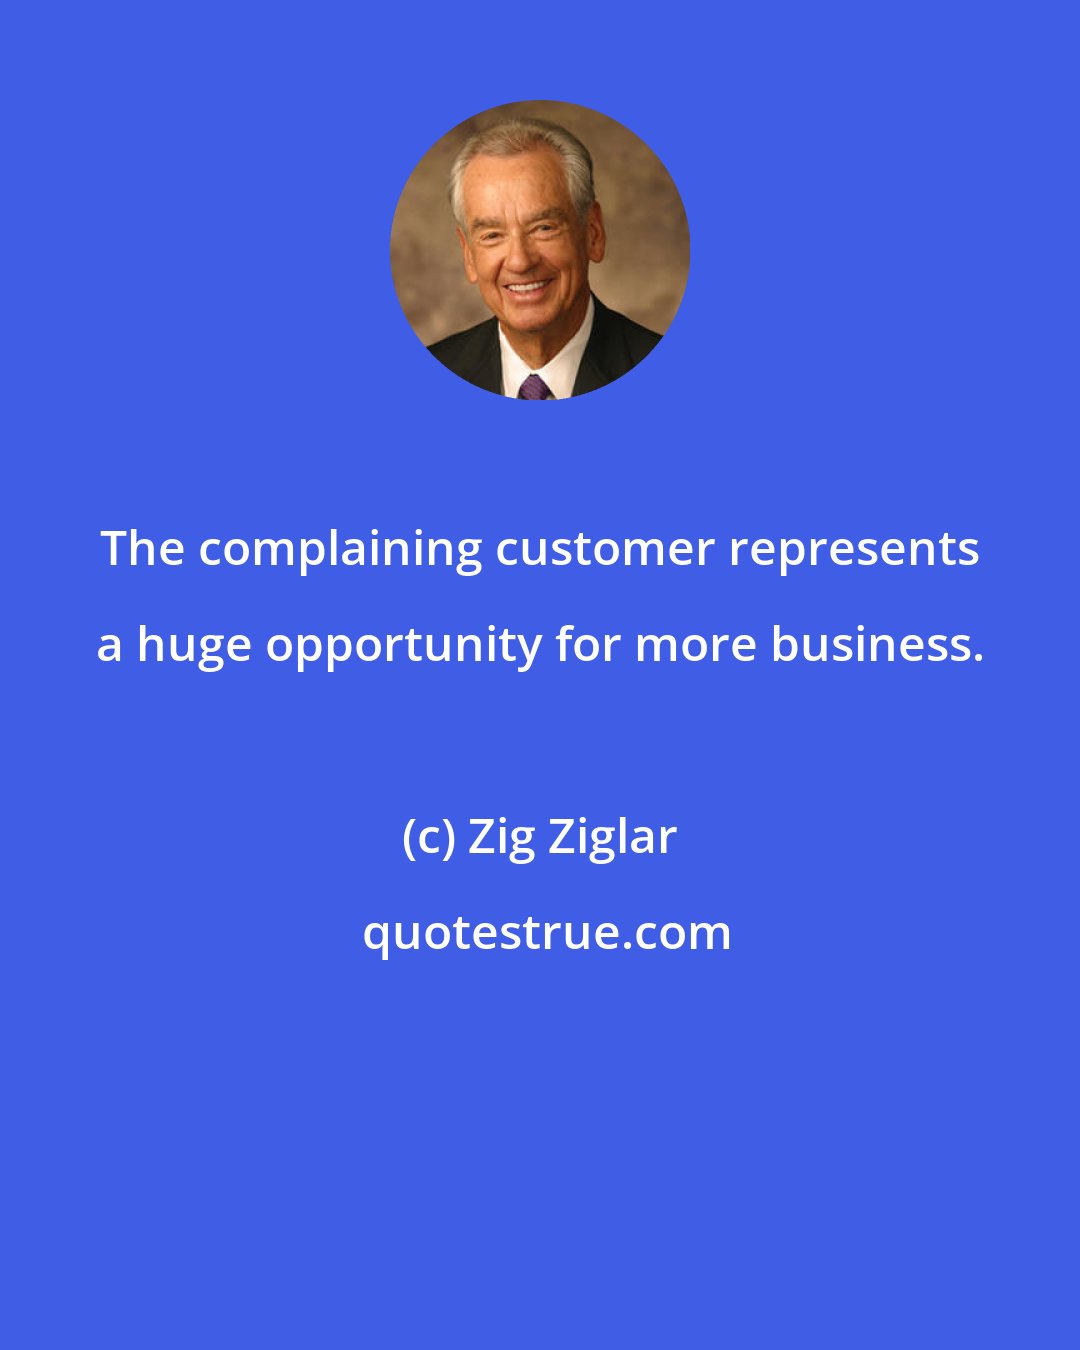 Zig Ziglar: The complaining customer represents a huge opportunity for more business.